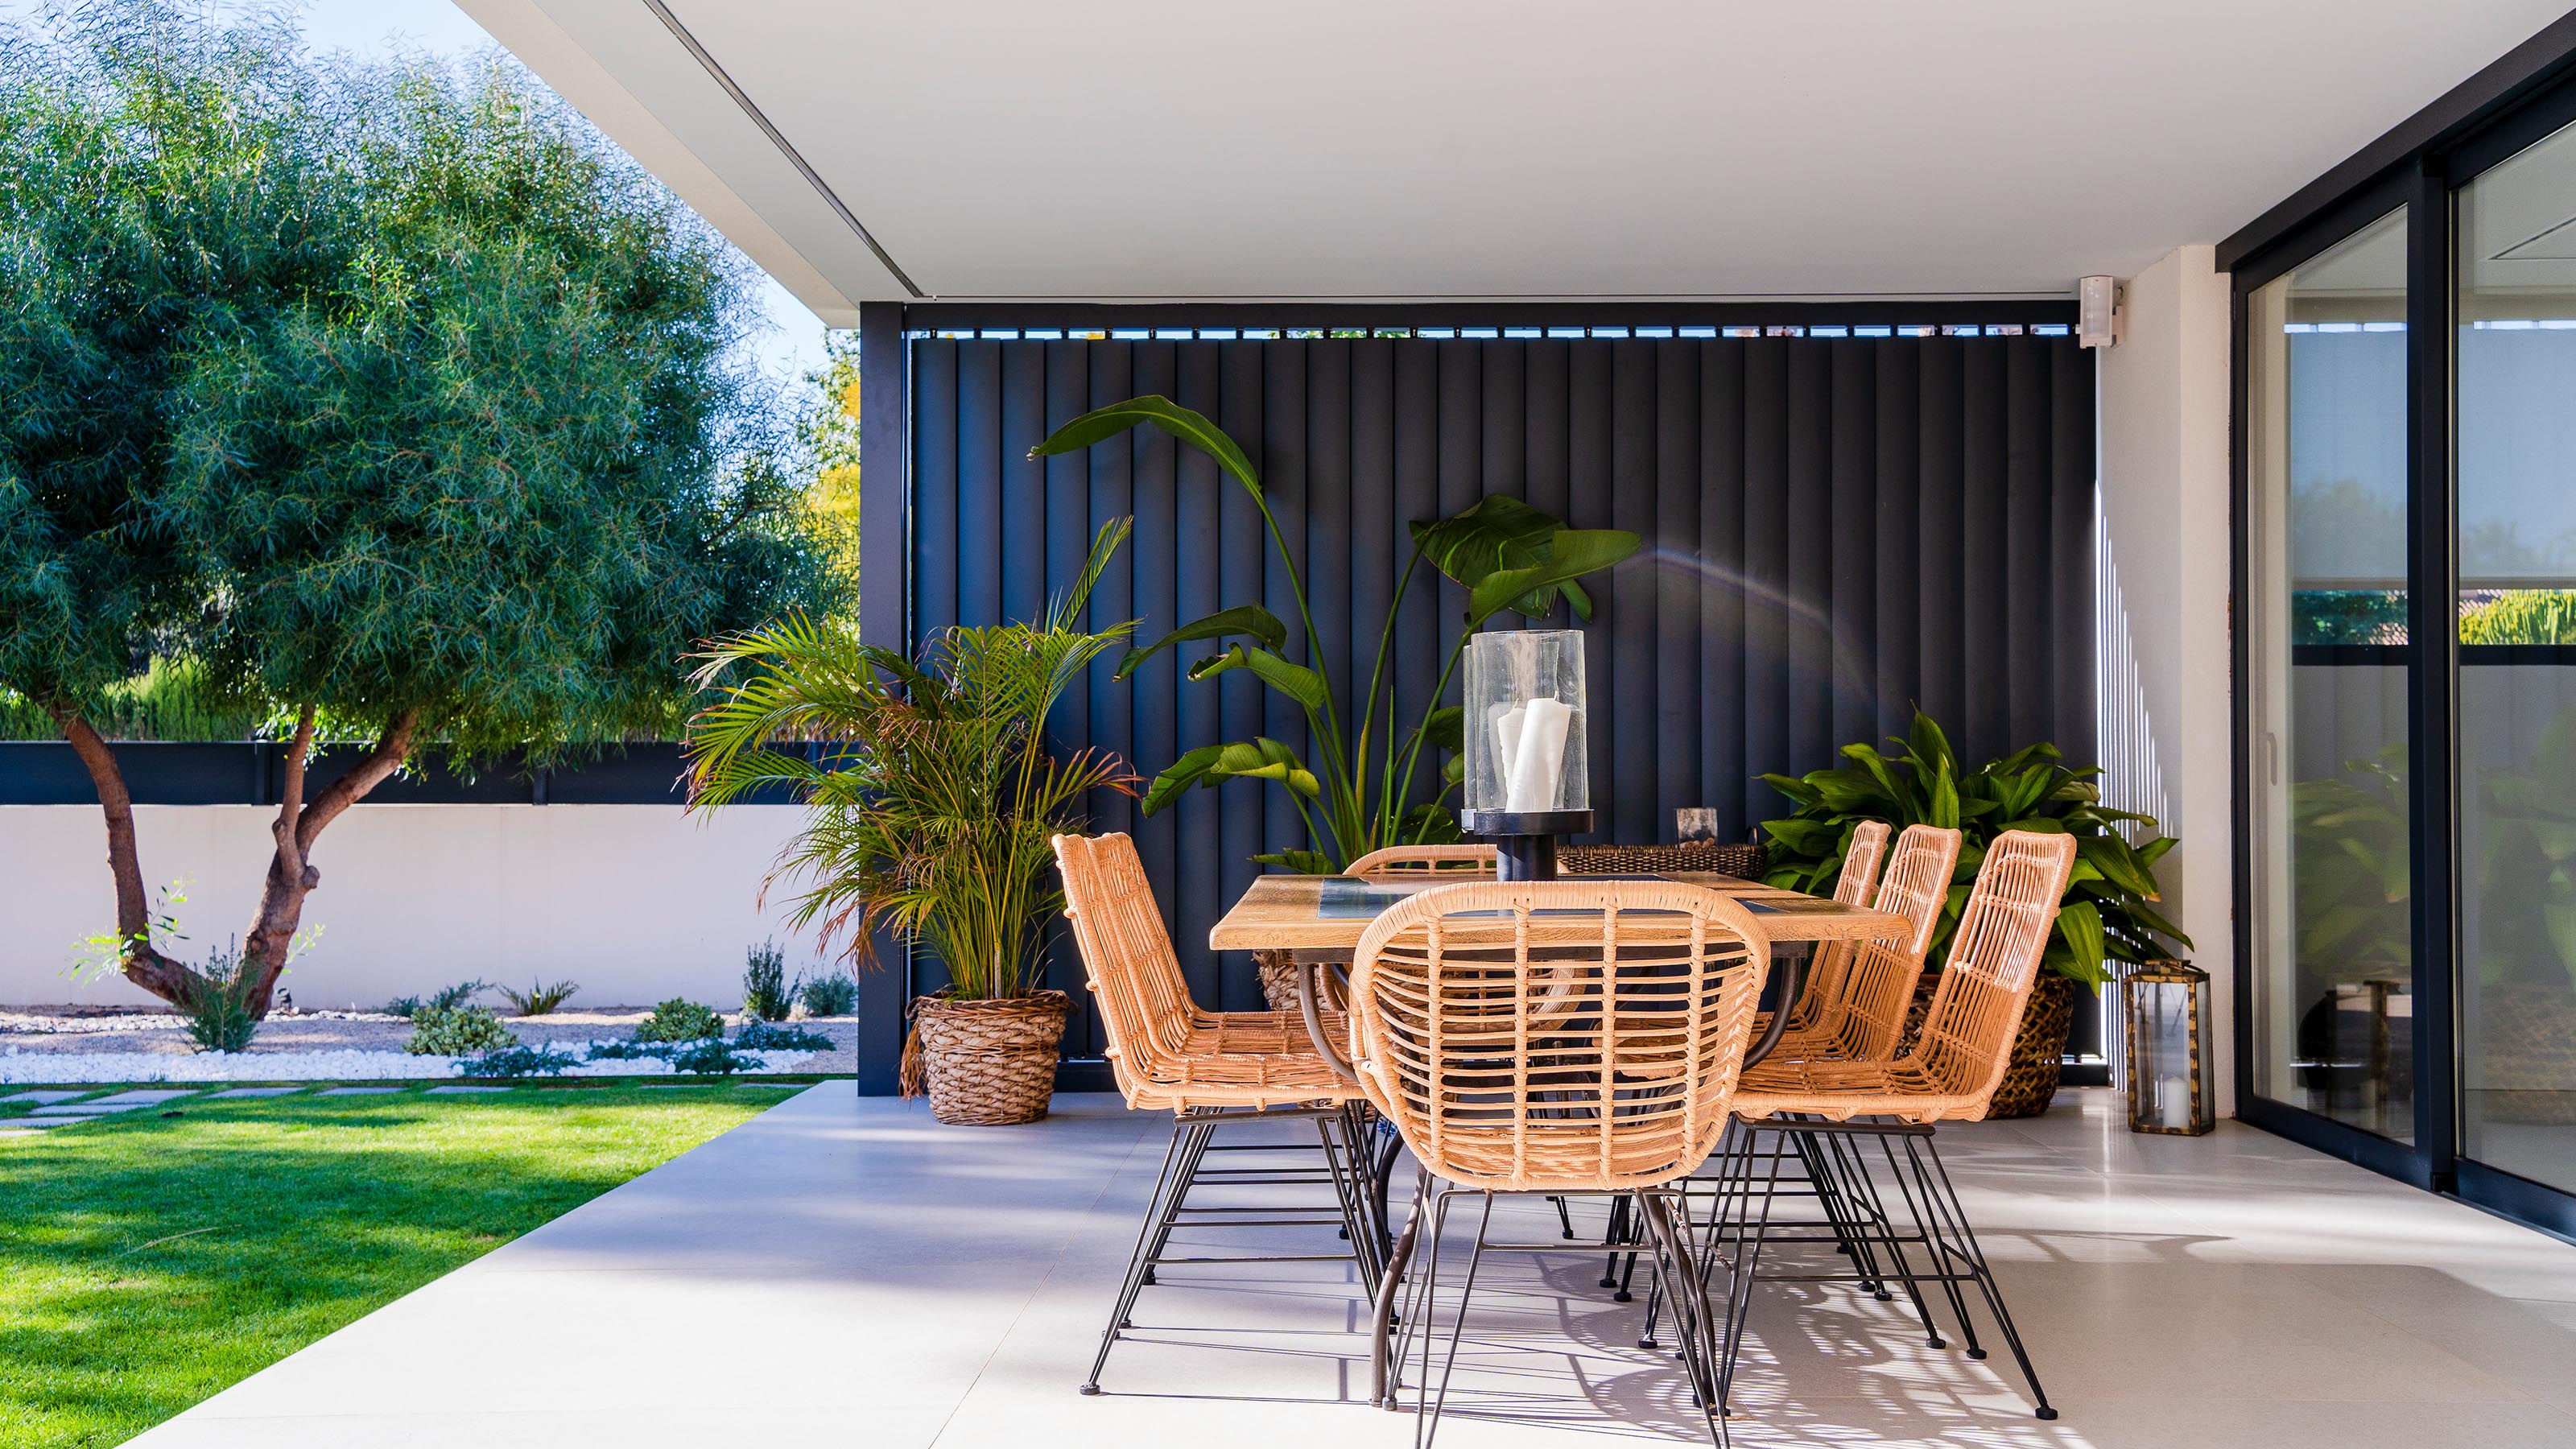 Enclosed Patio Ideas: 13 Ways To Cover Your Seating Space For Easy  Indoor-Outdoor Living | Gardeningetc